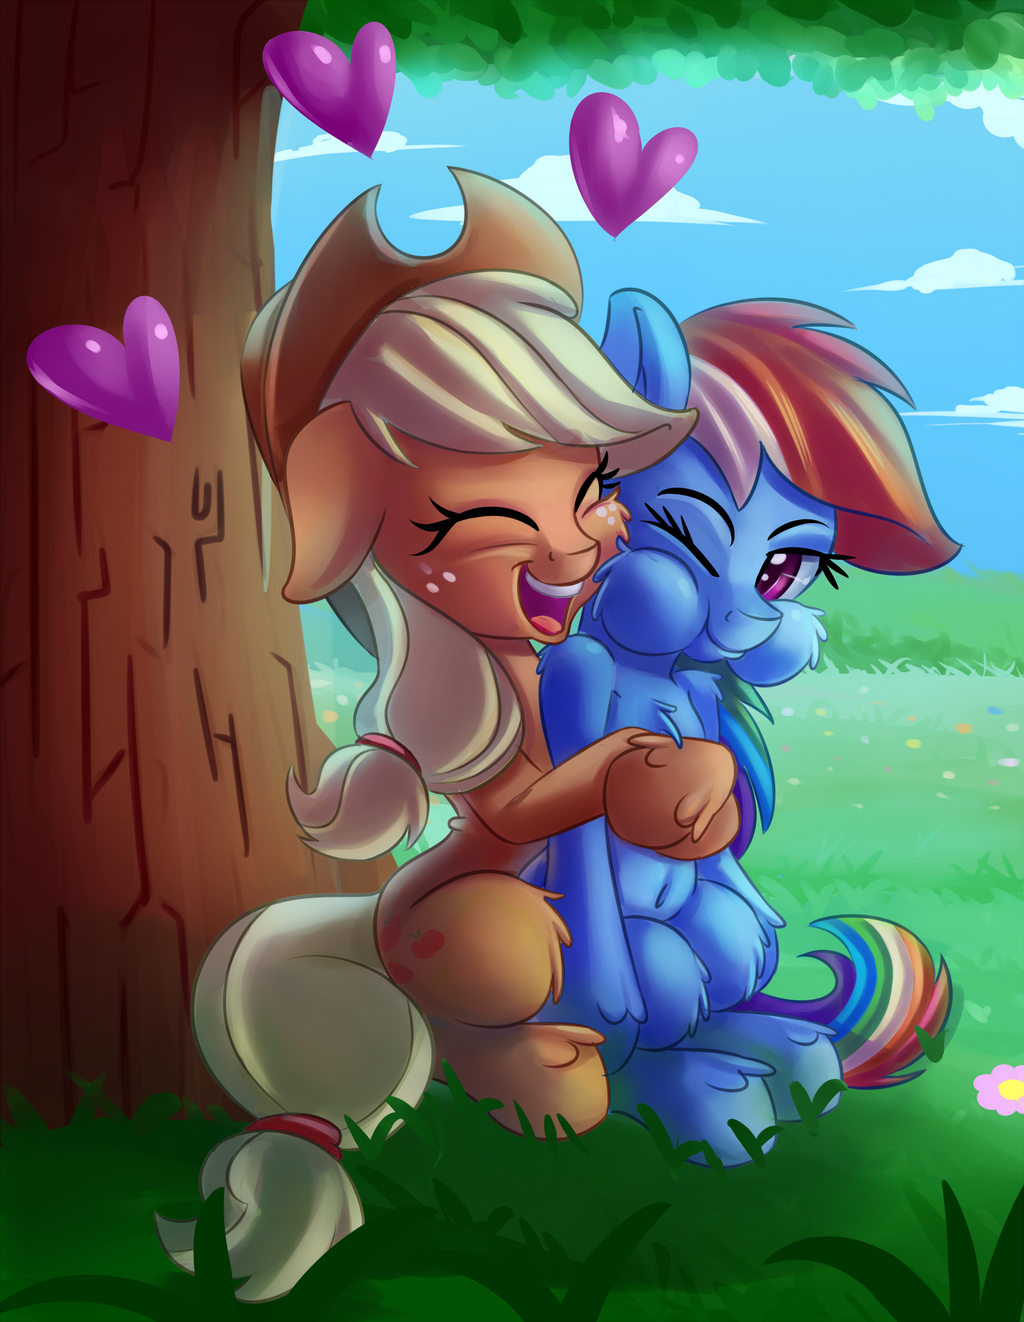 a_dash_of_apples_by_thediscorded_da8ycsl-fullview.png